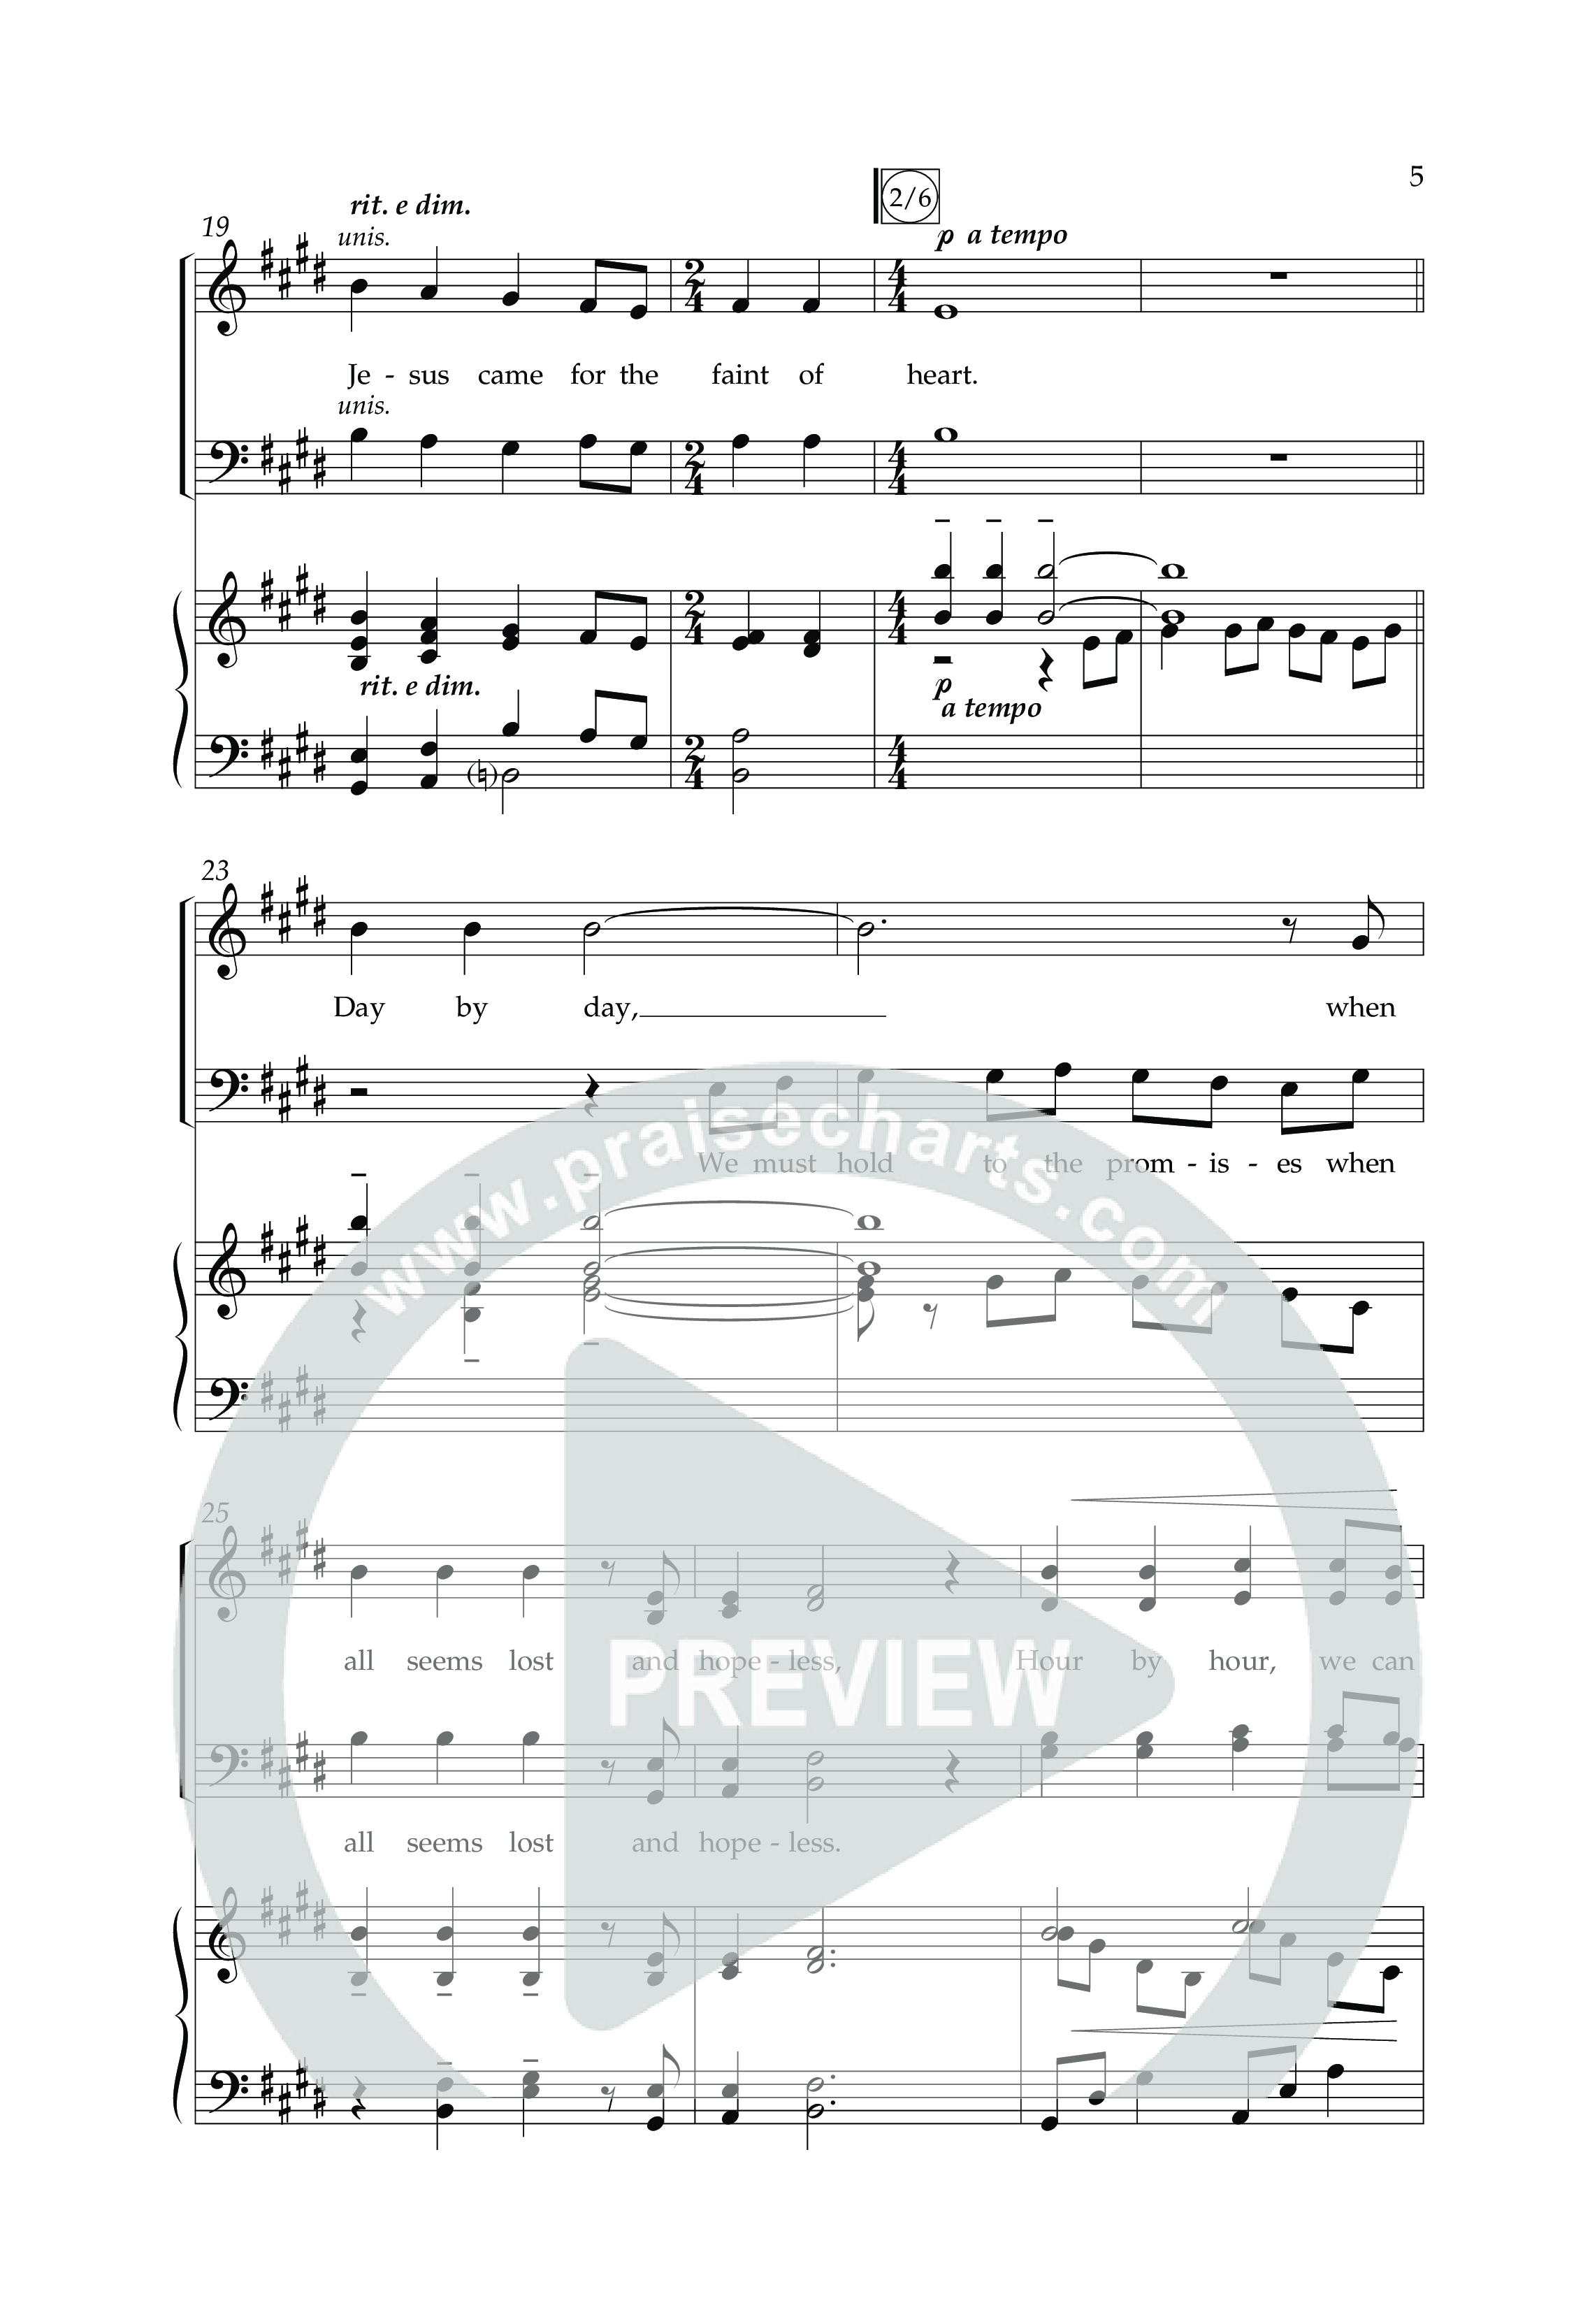 For The Sake Of The Faint Of Heart (Choral Anthem SATB) Anthem (SATB/Piano) (Lifeway Choral / Arr. Phillip Keveren)